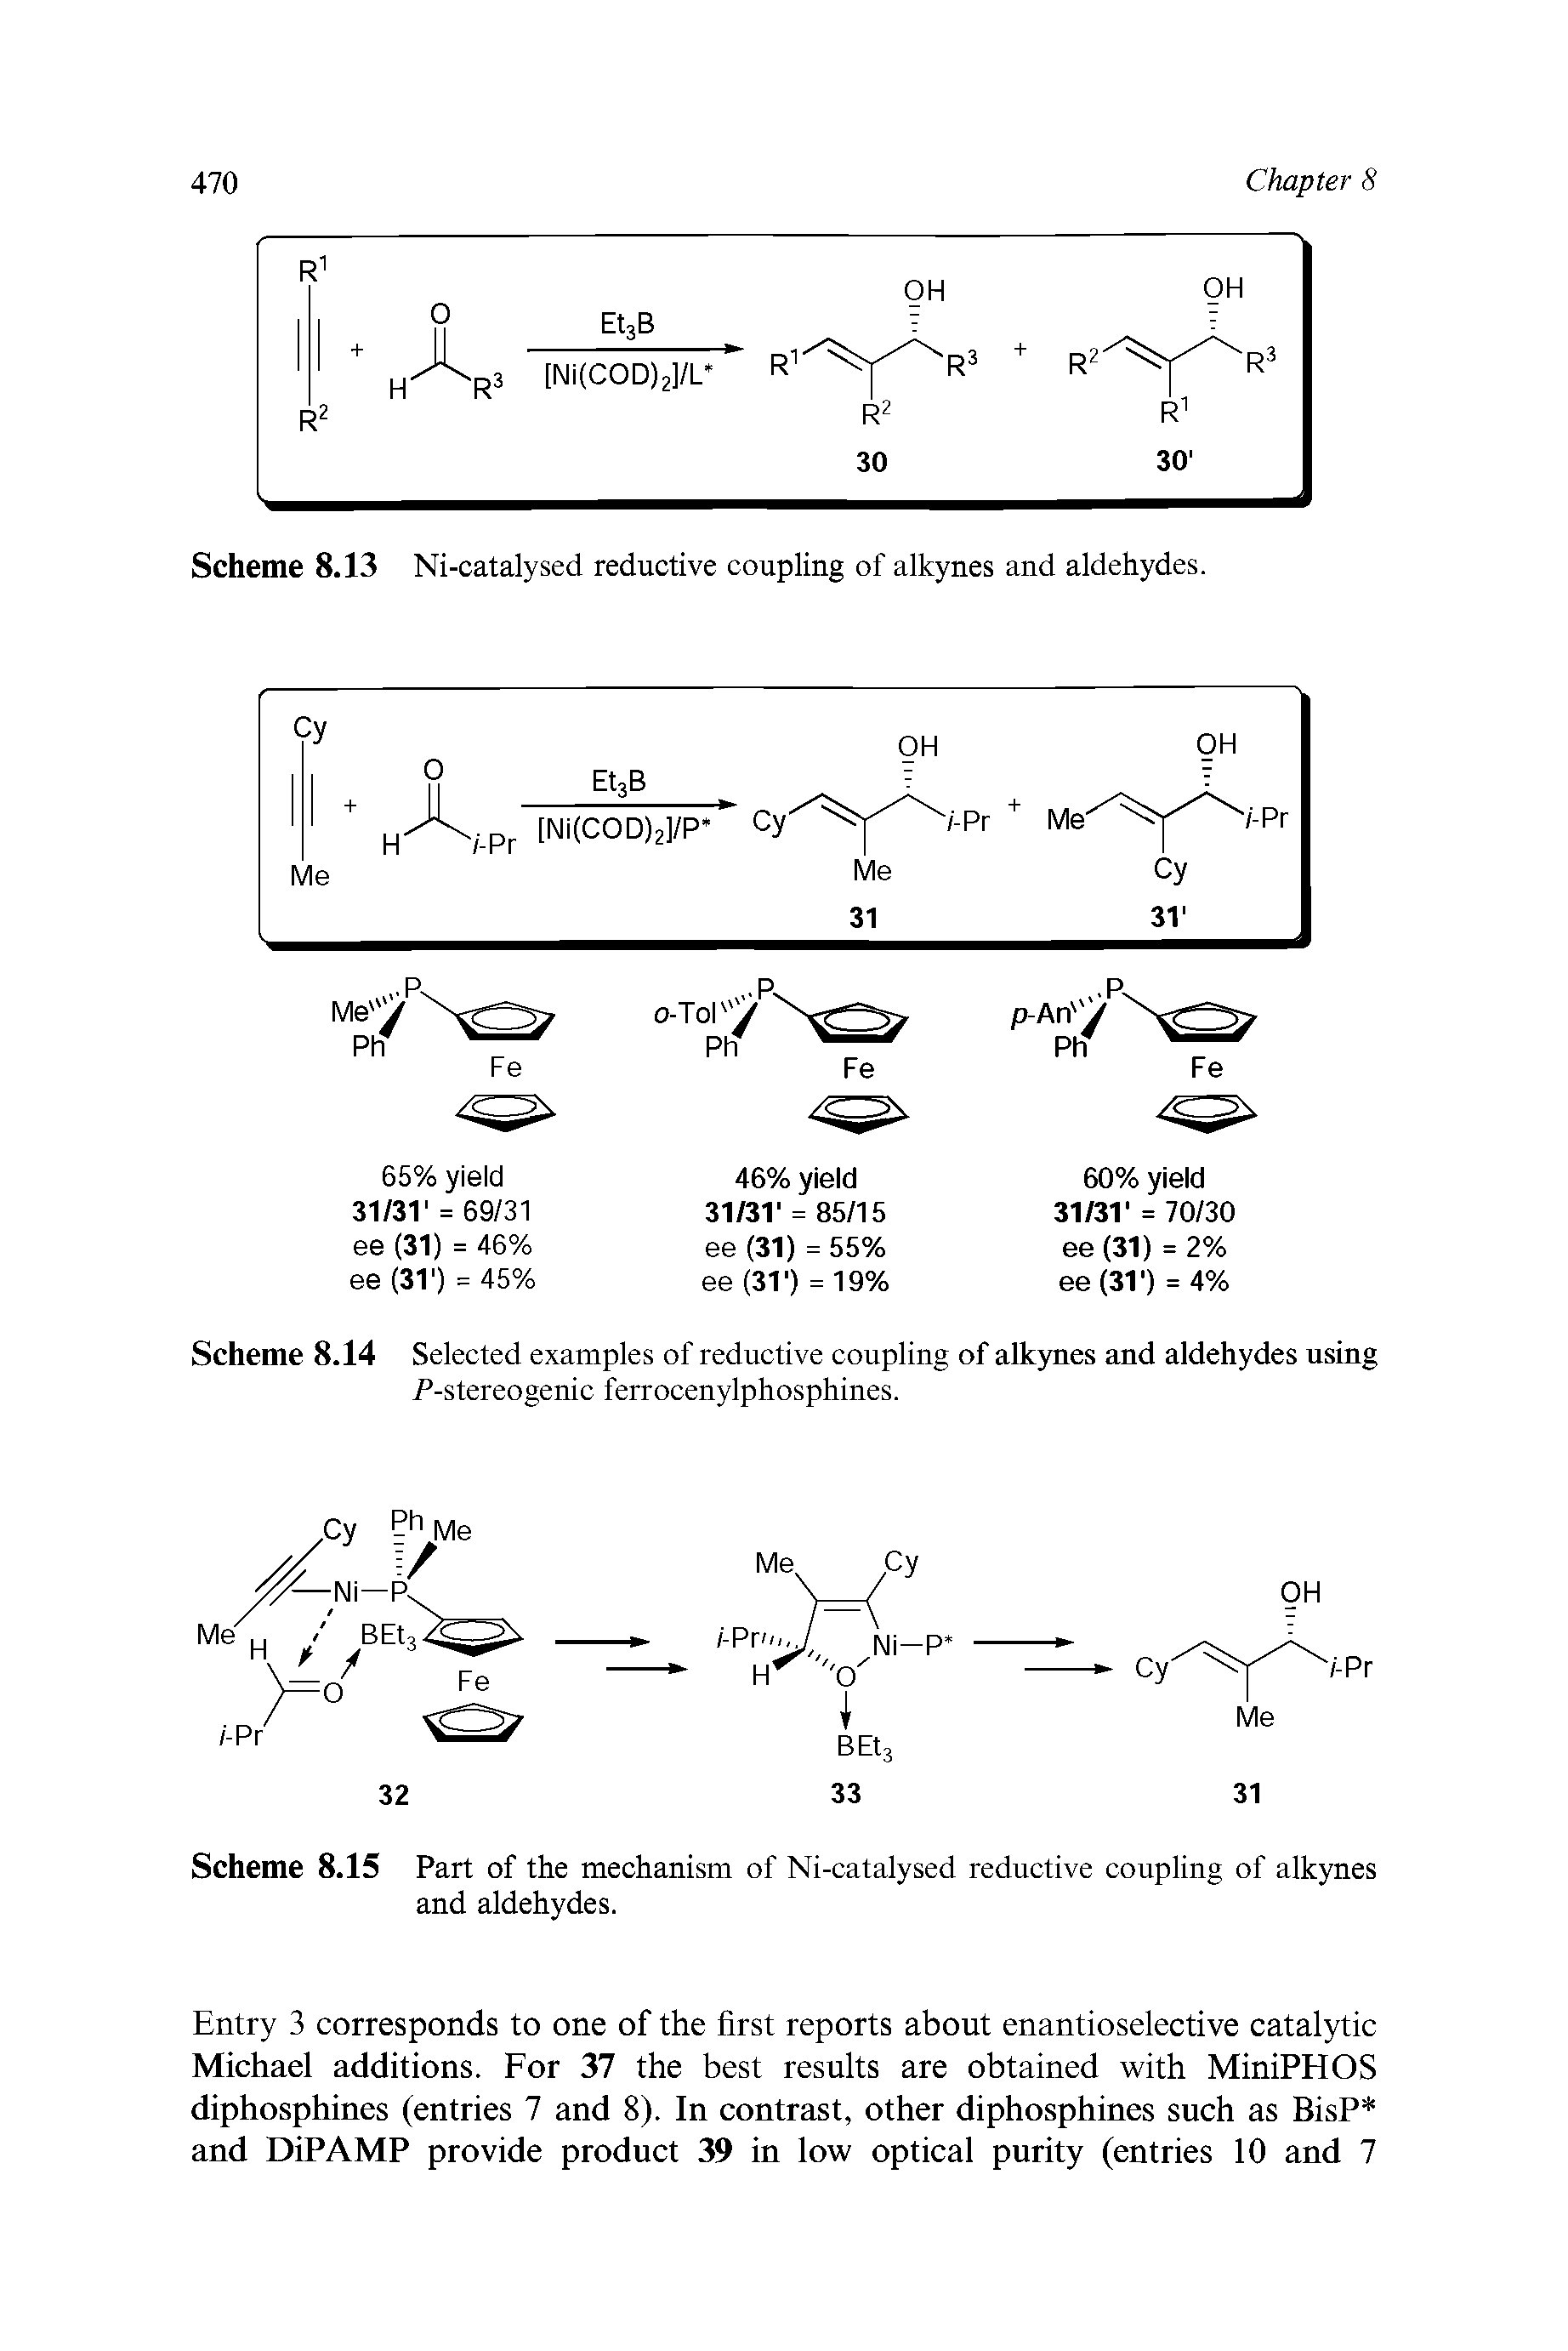 Scheme 8.14 Selected examples of reductive coupling of alkynes and aldehydes using P-stereogenic ferrocenylphosphines.